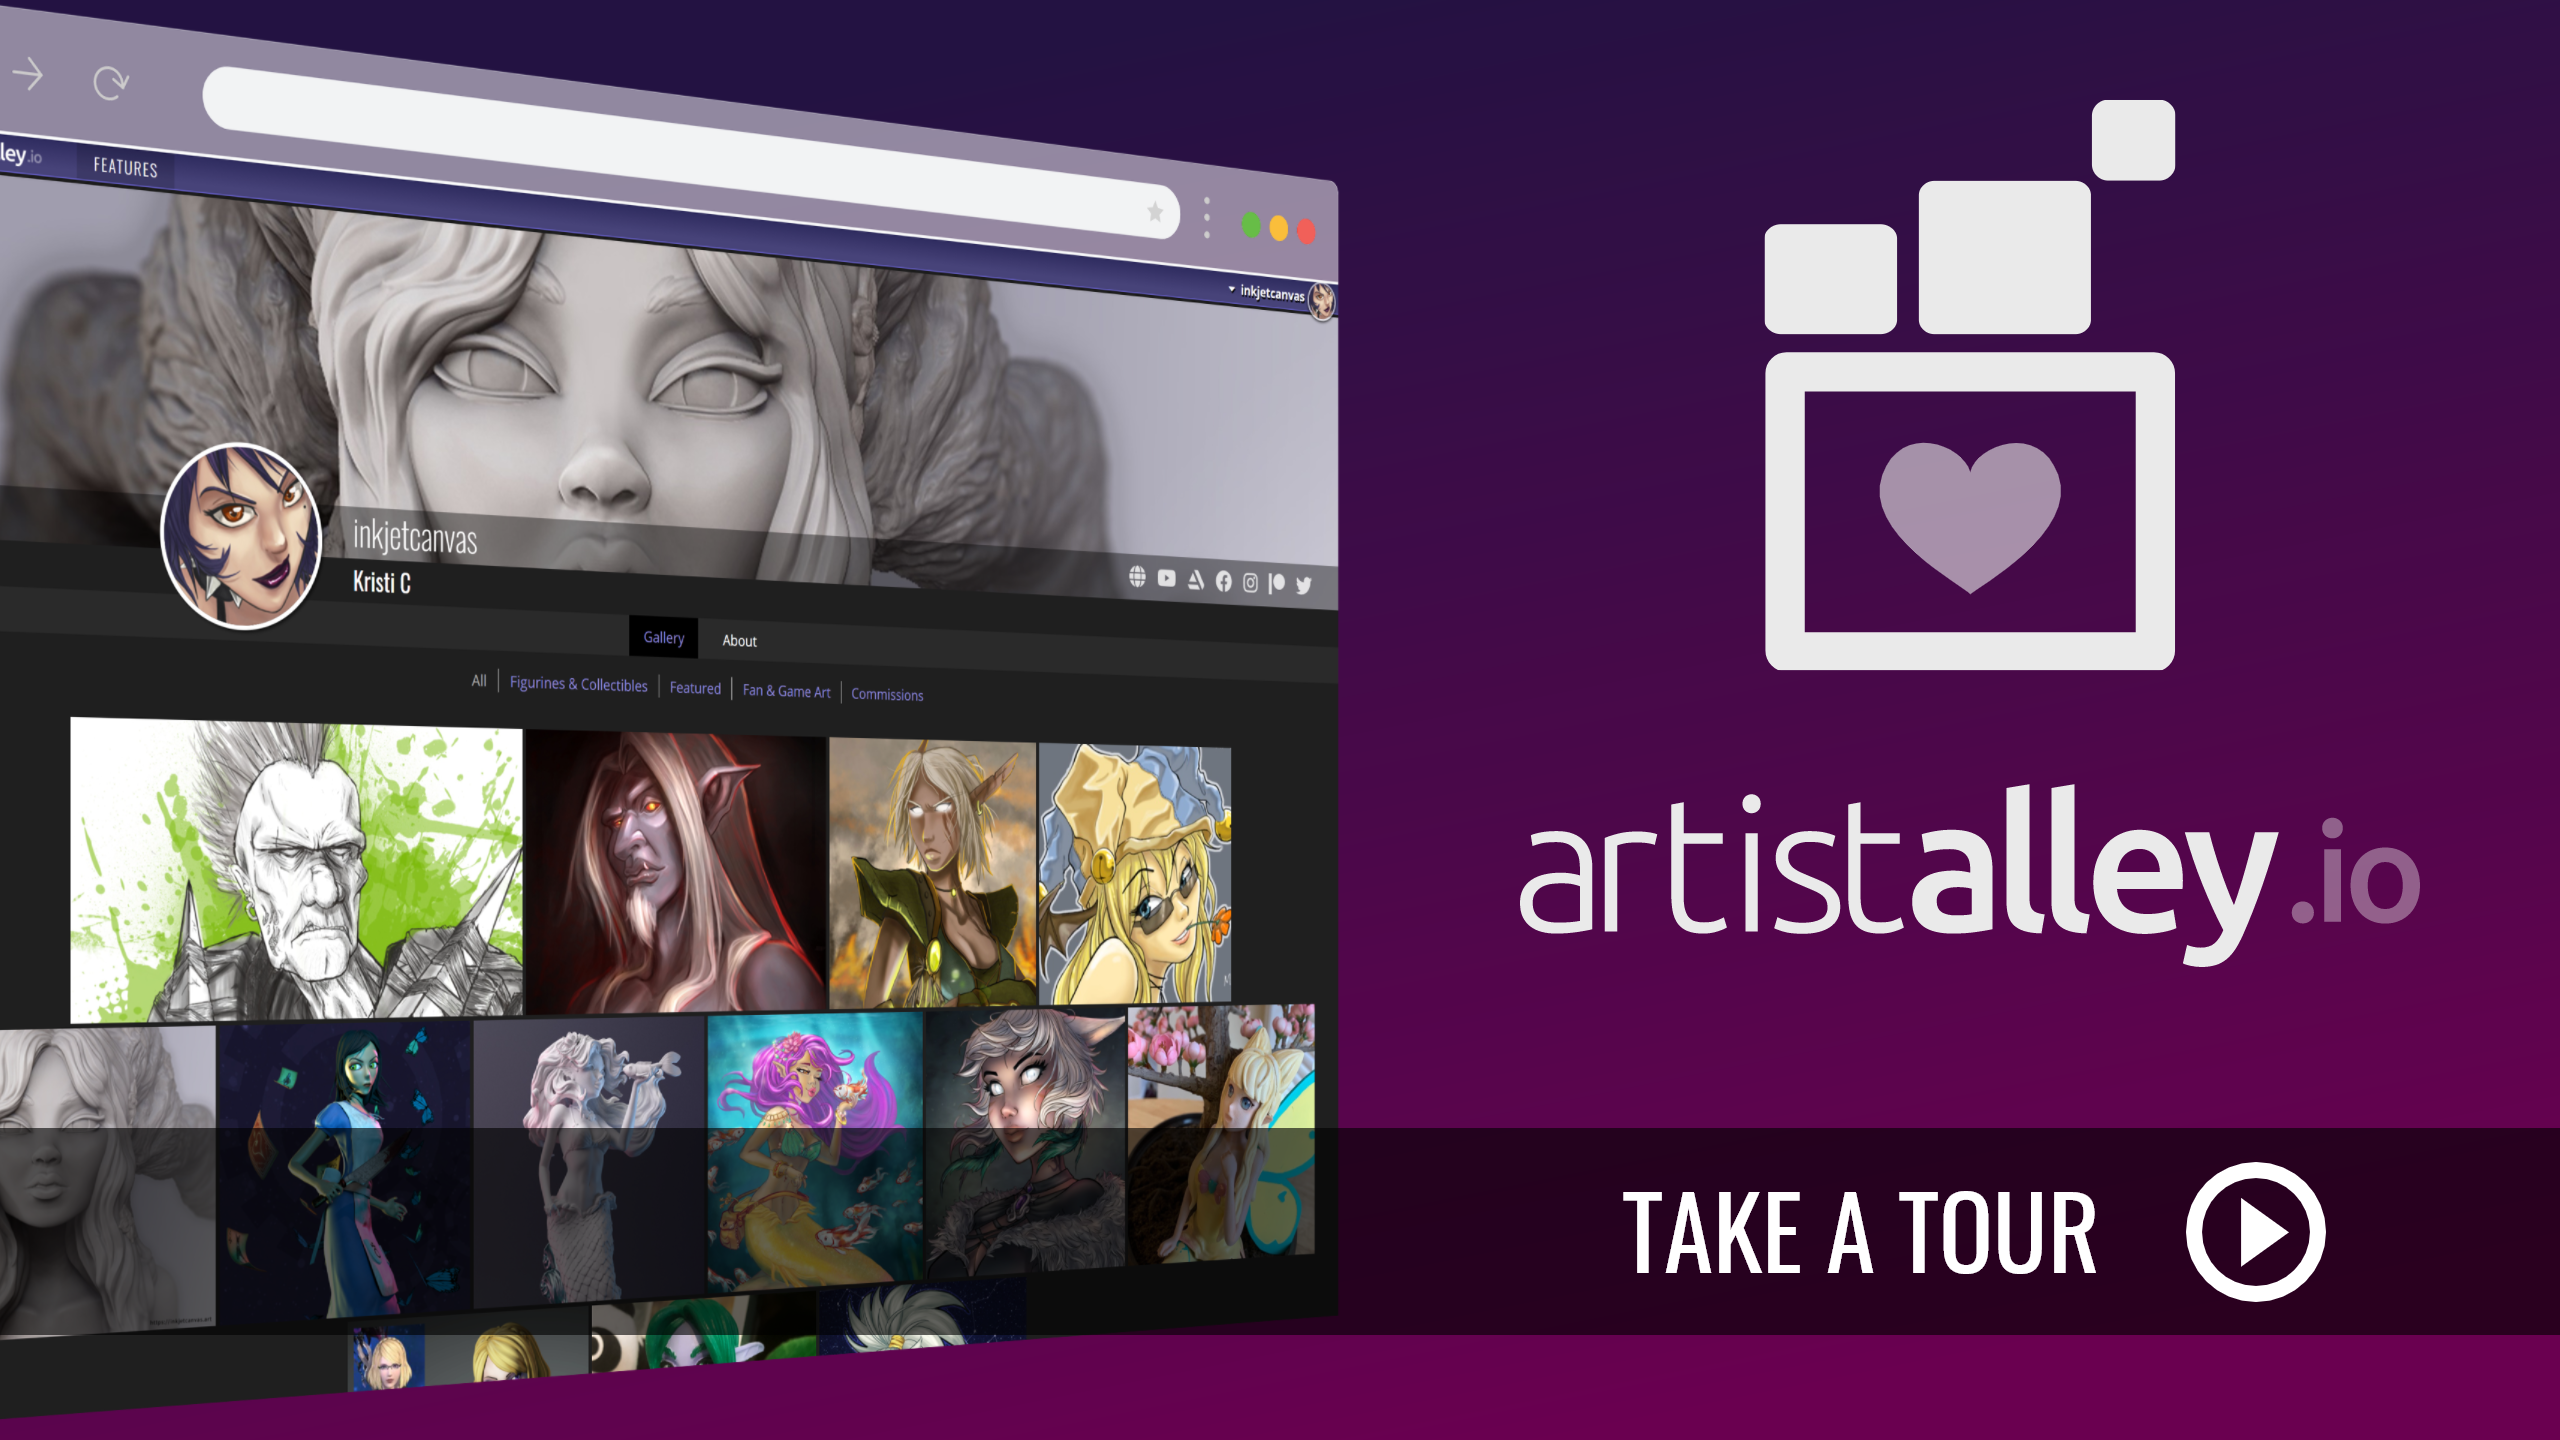 ArtistAlley.io Sizzle Reel Goes Live